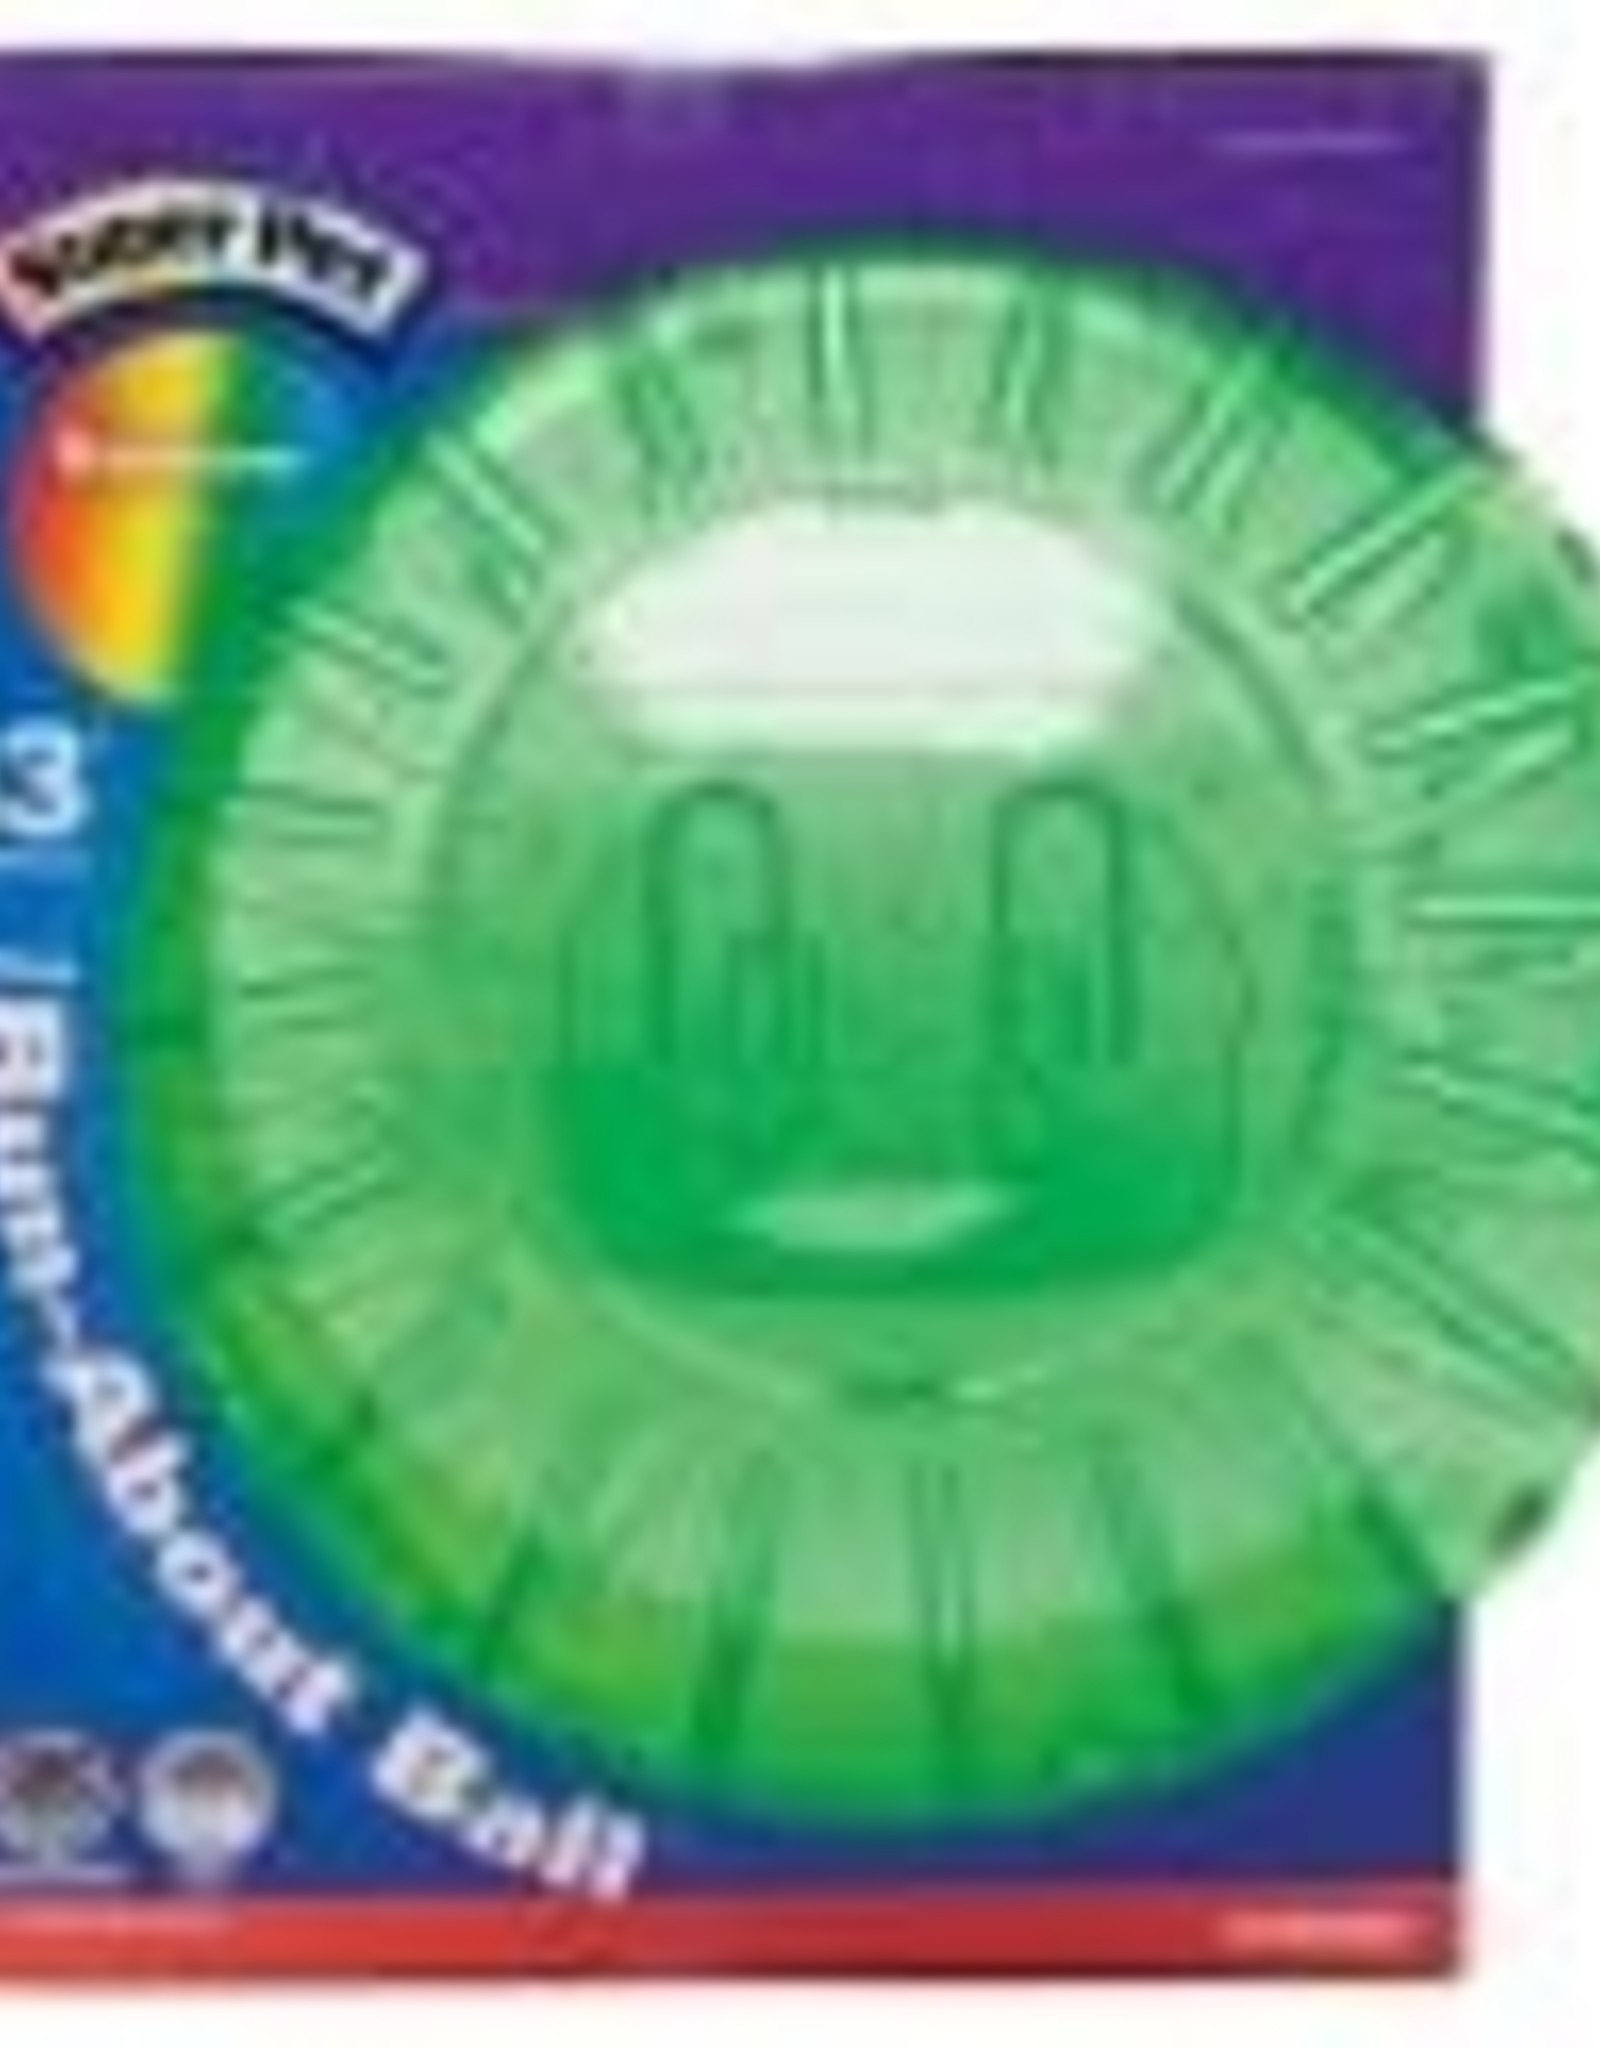 CENTRAL - KAYTEE PRODUCTS SUPER PET- RUN ABOUT BALL- 13 DIA- RAINBOW